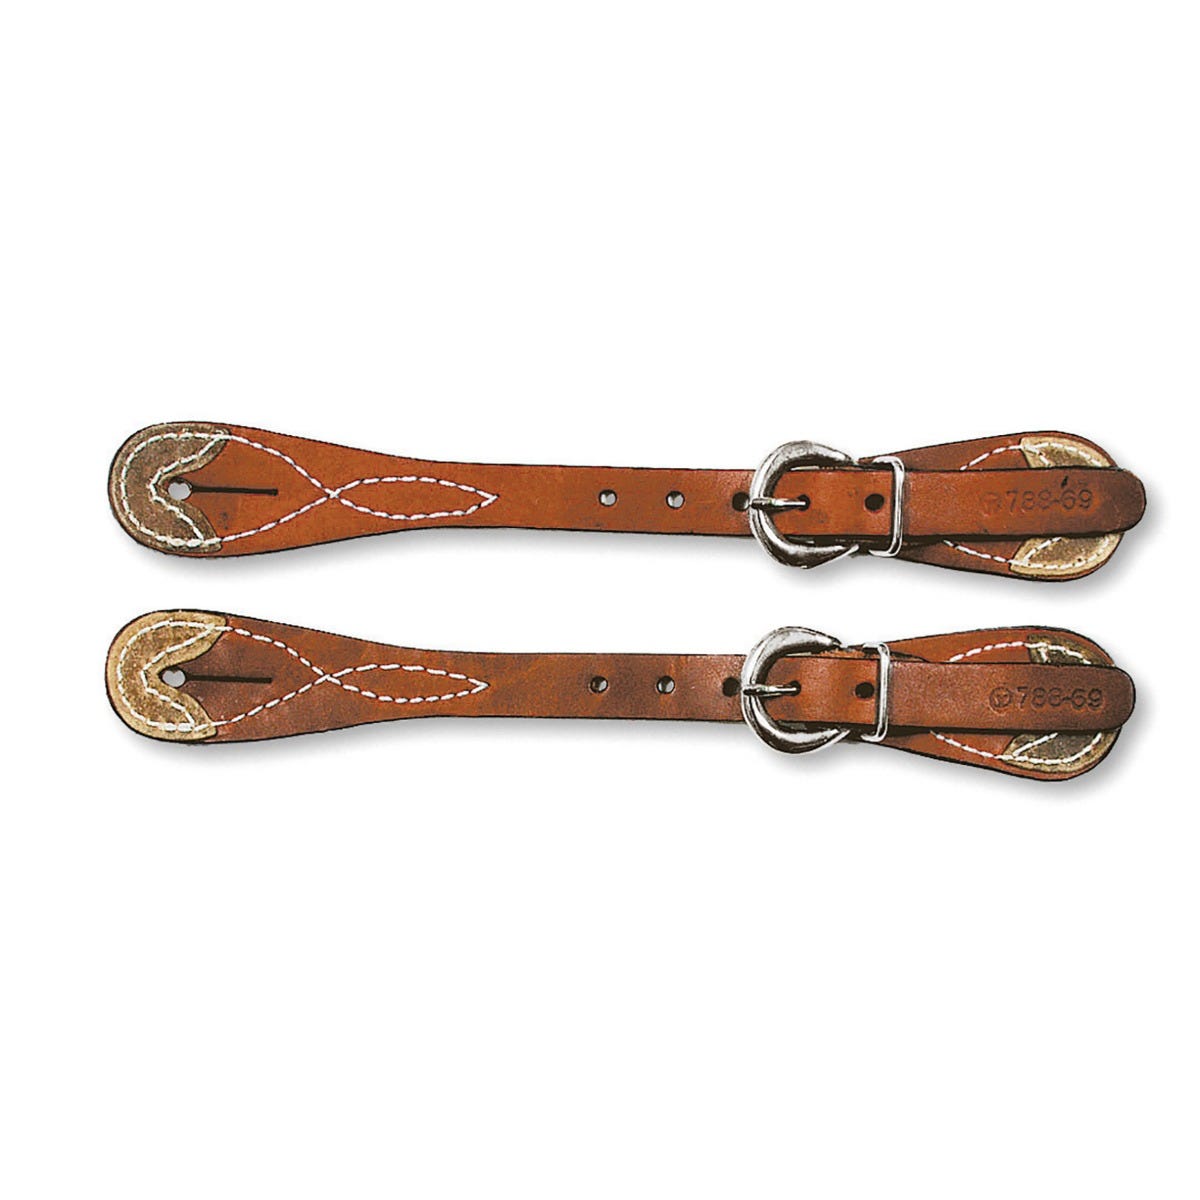 Rawhide Tipped Spur Straps 0